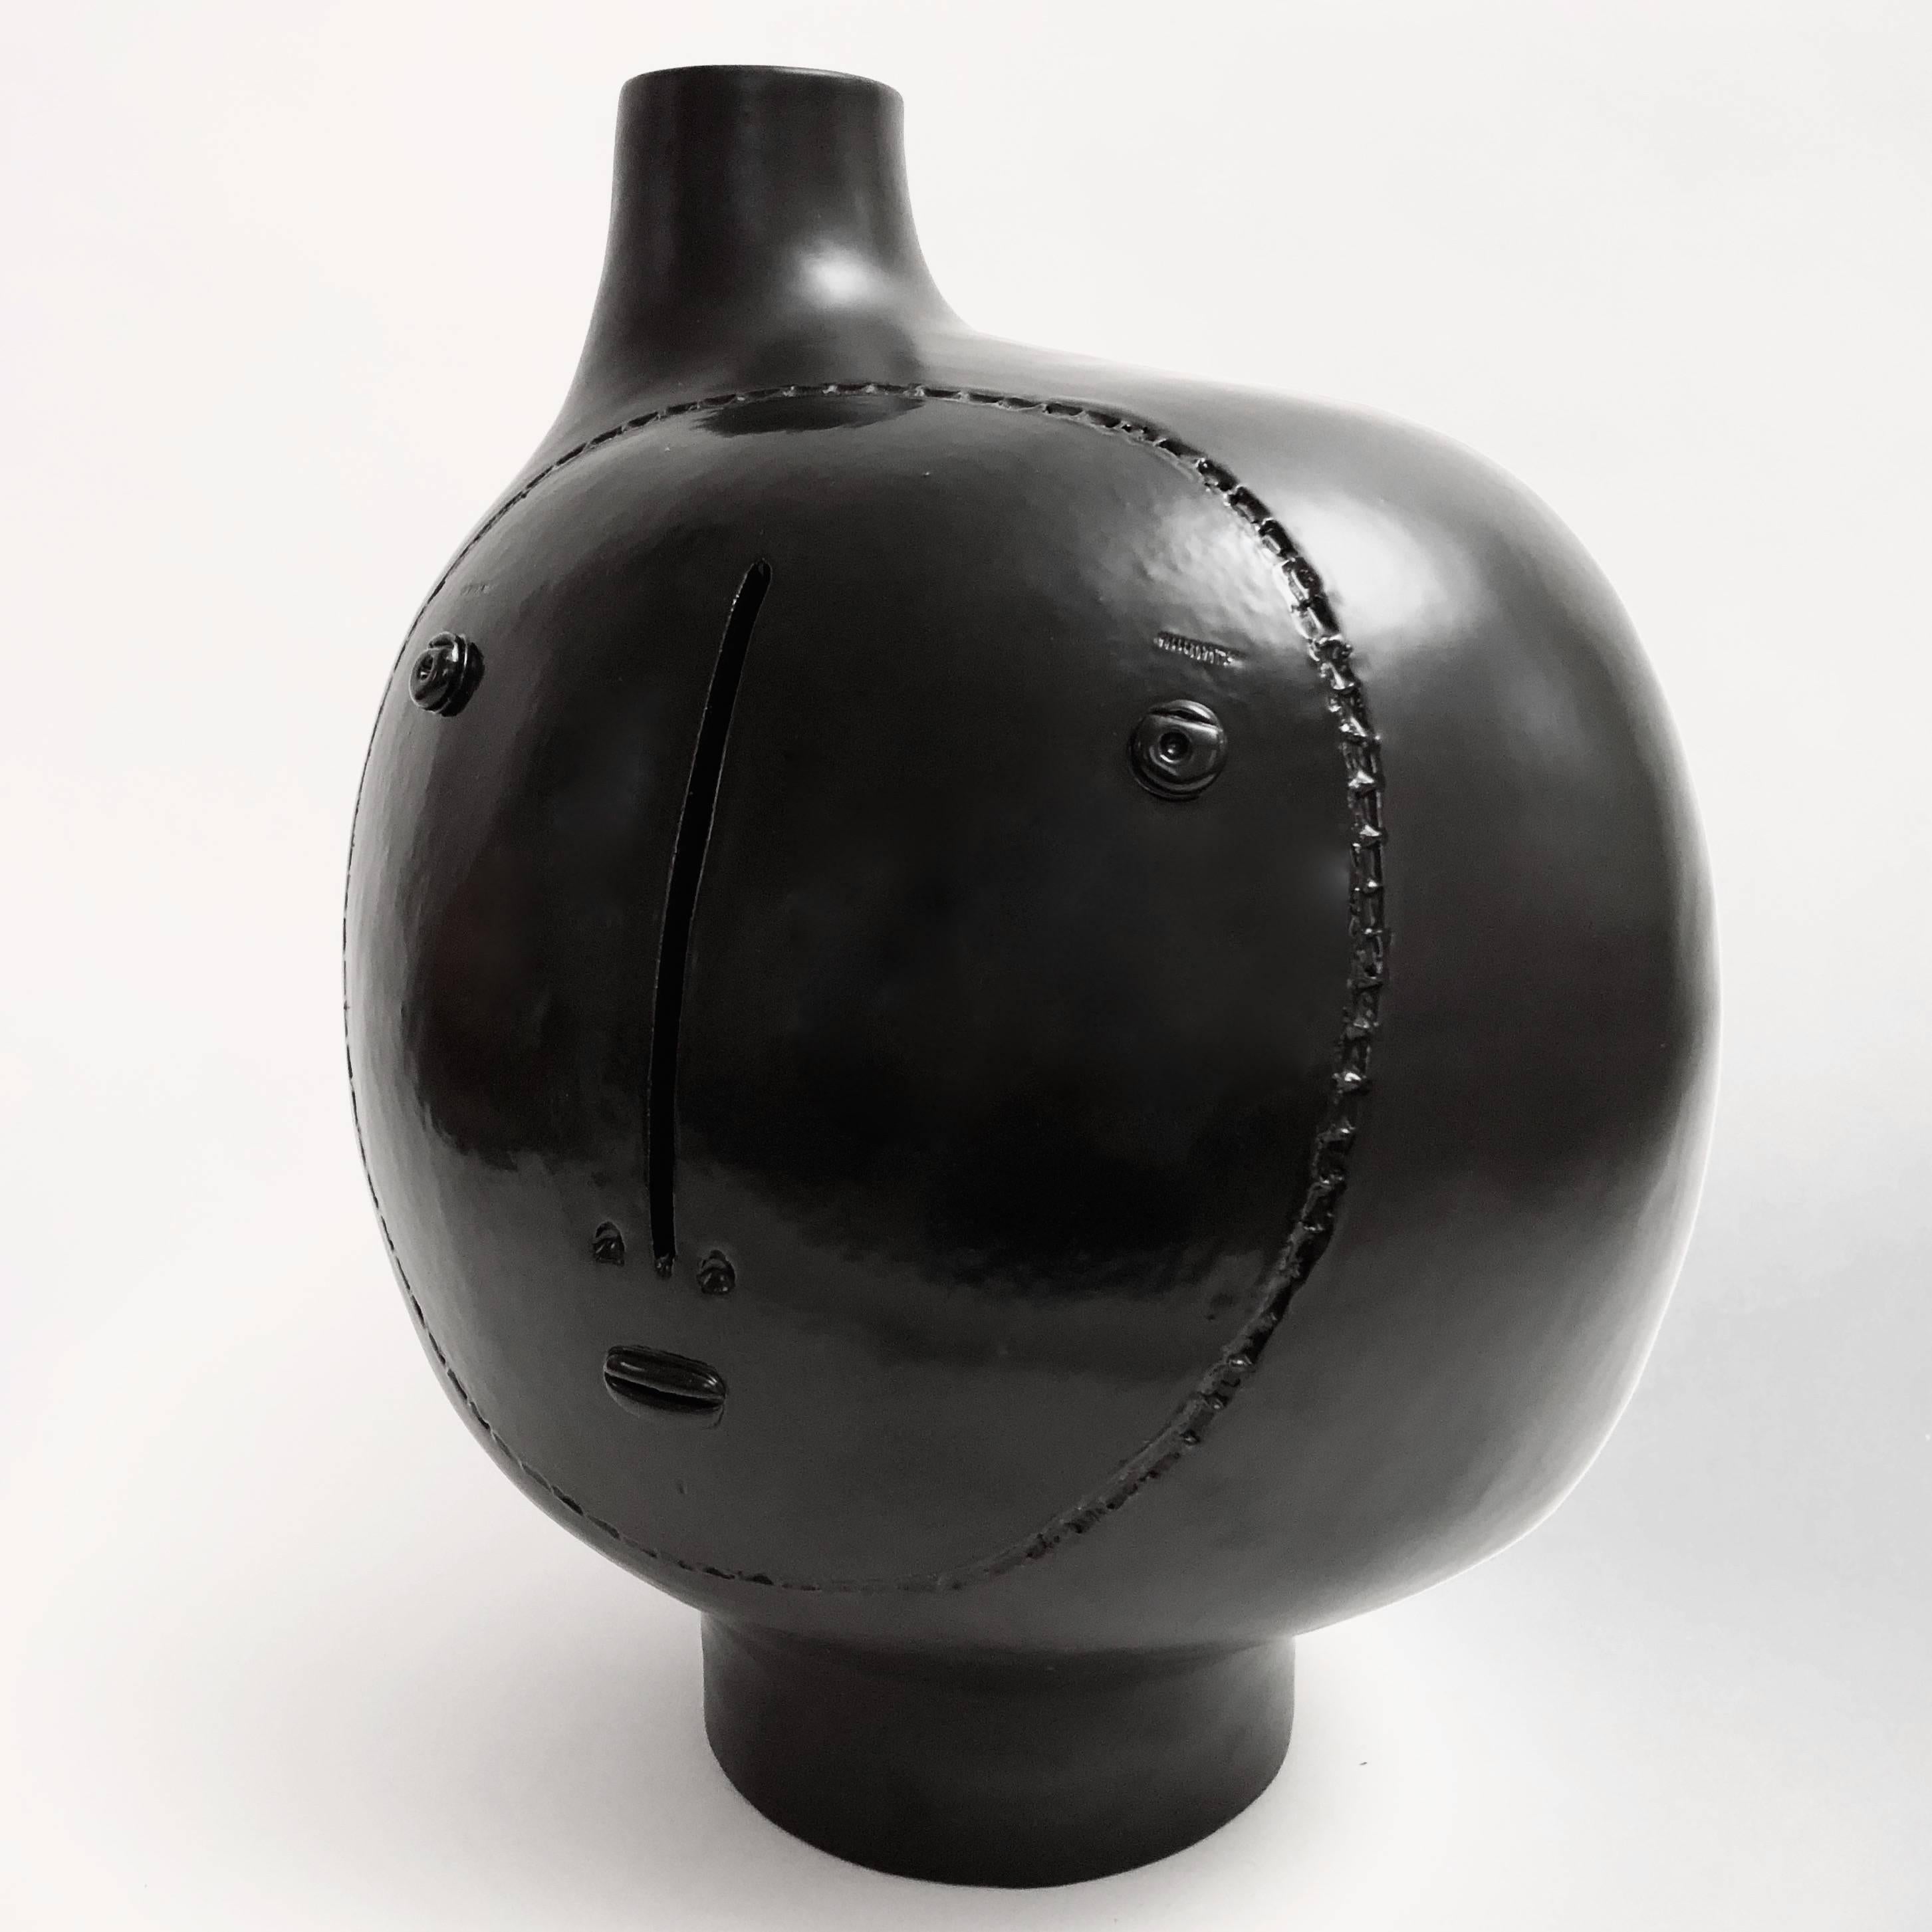 Large hand-sculpted ceramic lamp base, biomorphic shape, stoneware glazed in matt and shiny black, decorated with a stylized visage in front.

One of a kind piece designed and signed by the French ceramicists. 

The height dimension is for the